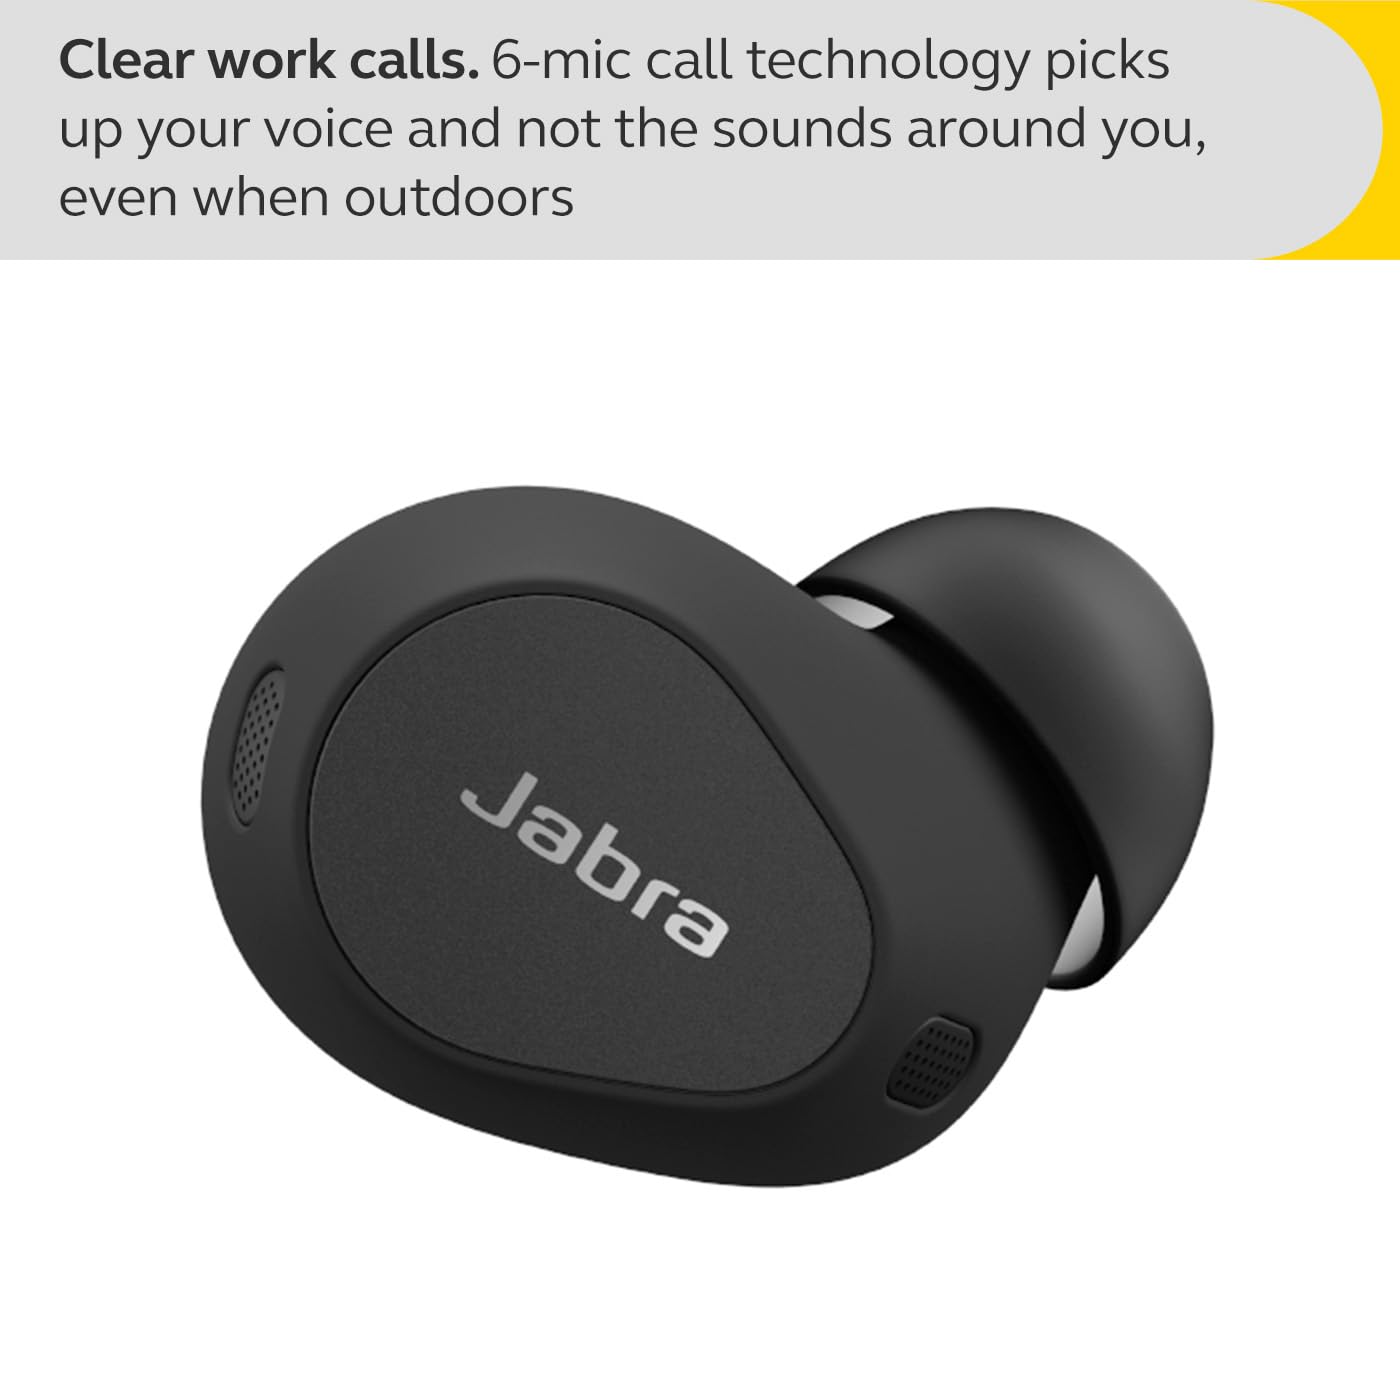 Jabra Elite 10 True Wireless Earbuds – Advanced Active Noise Cancelling Earbuds with Next-Level Dolby Atmos Surround Sound –All-Day Comfort, Multipoint Bluetooth, Wireless Charging – Matte Black